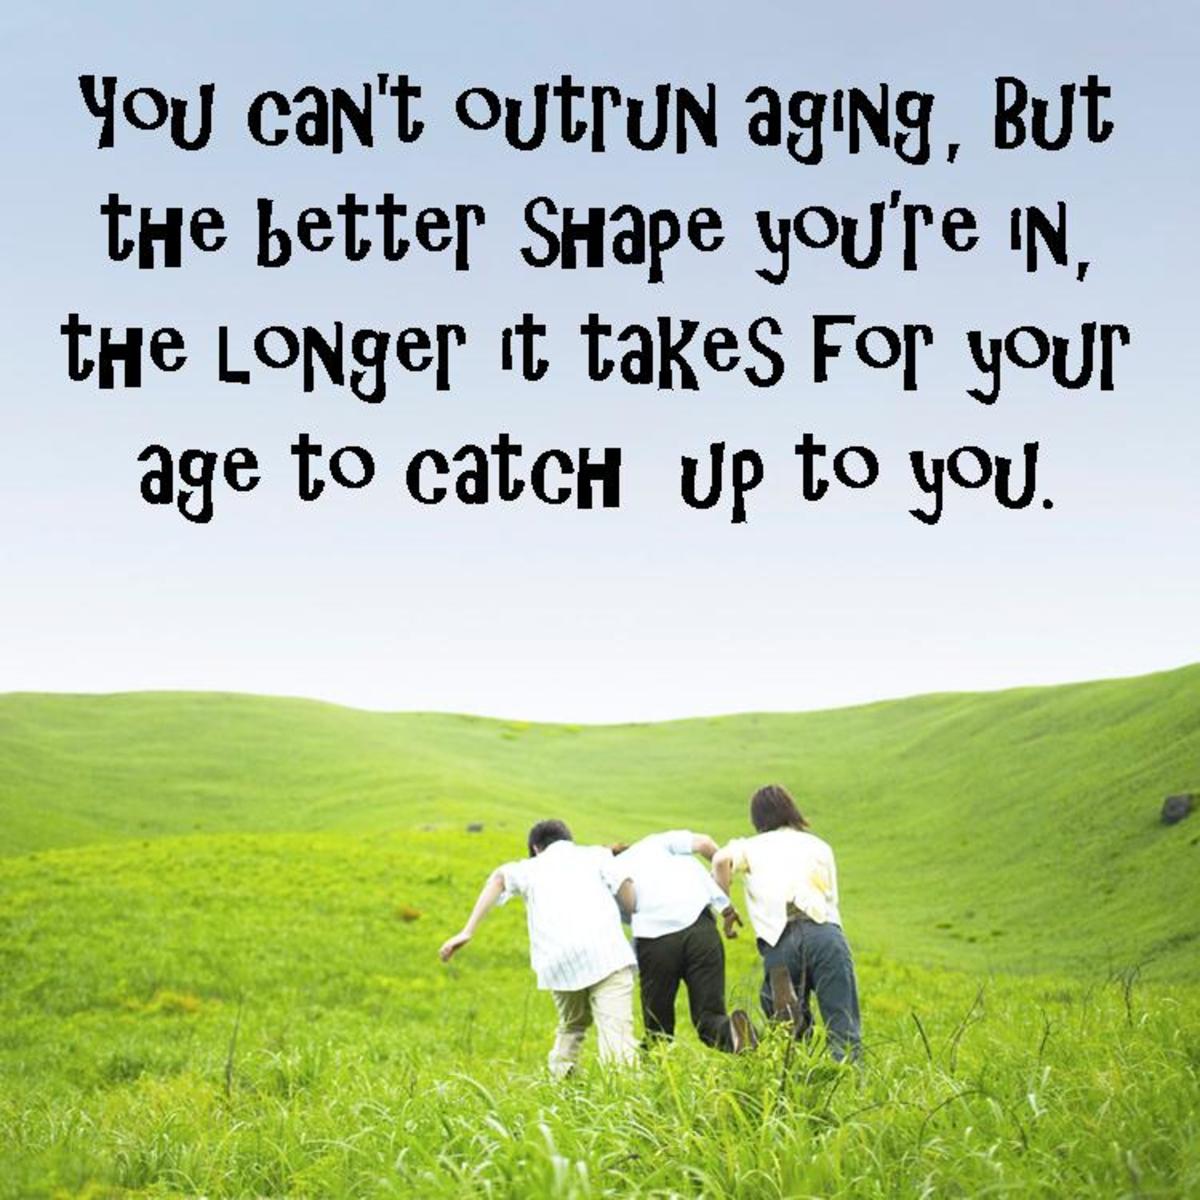 Here's a little inspiration to help motivate someone who's getting older to exercise.